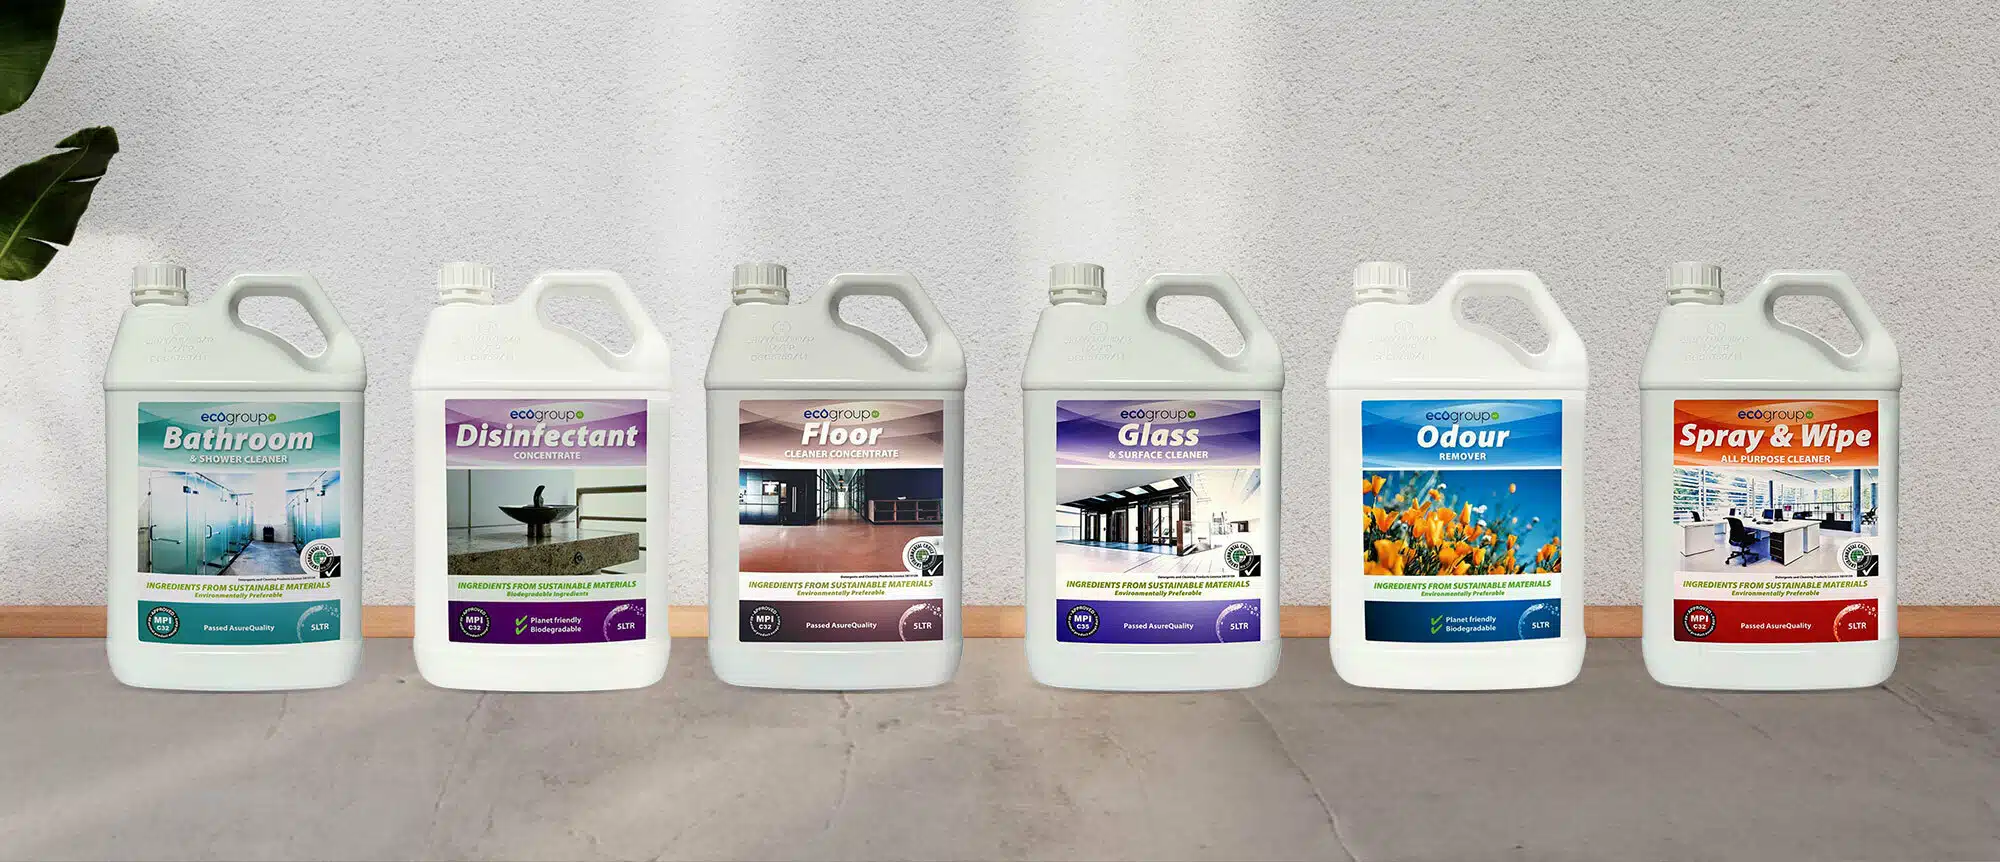 Ecogroup Disinfectant as part of HQ Clean’s eco-friendly product range